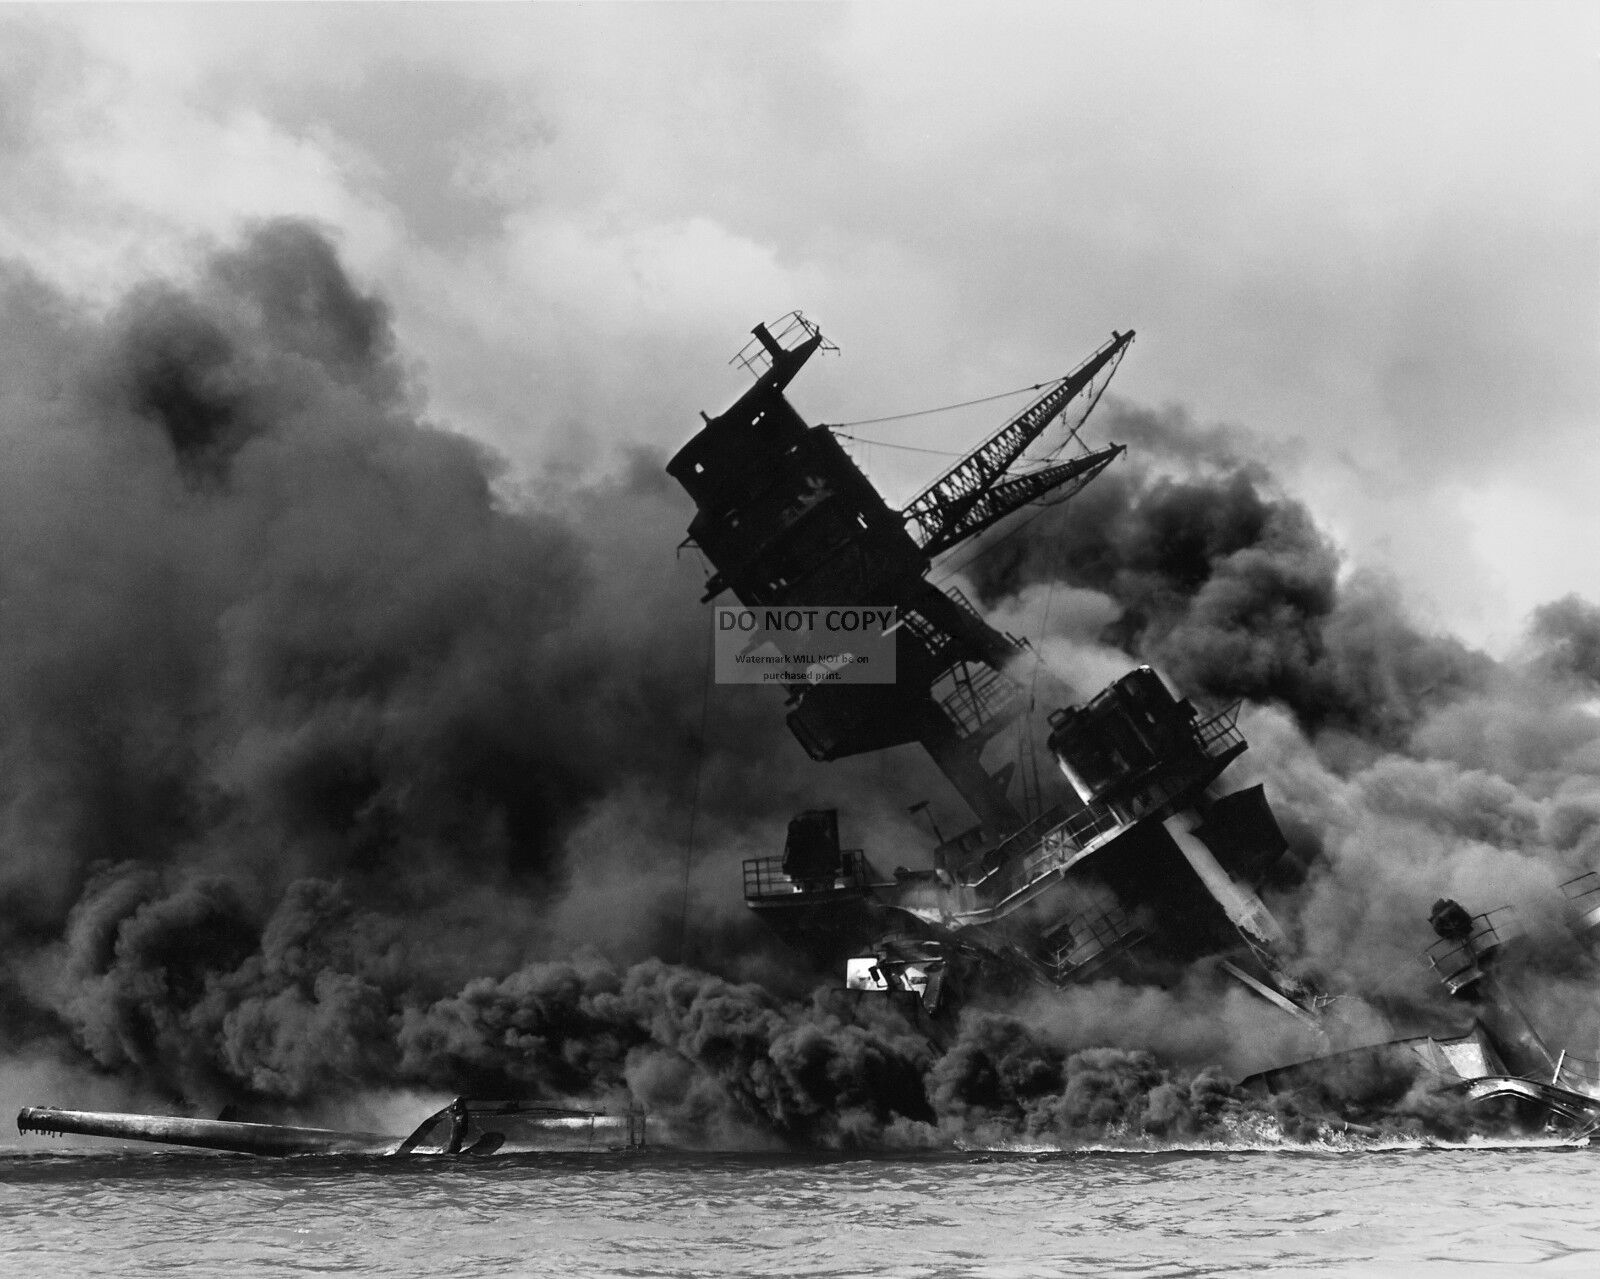 USS ARIZONA BURNS AFTER THE JAPANESE ATTACK ON PEARL HARBOR  8X10 PHOTO (EE-178)